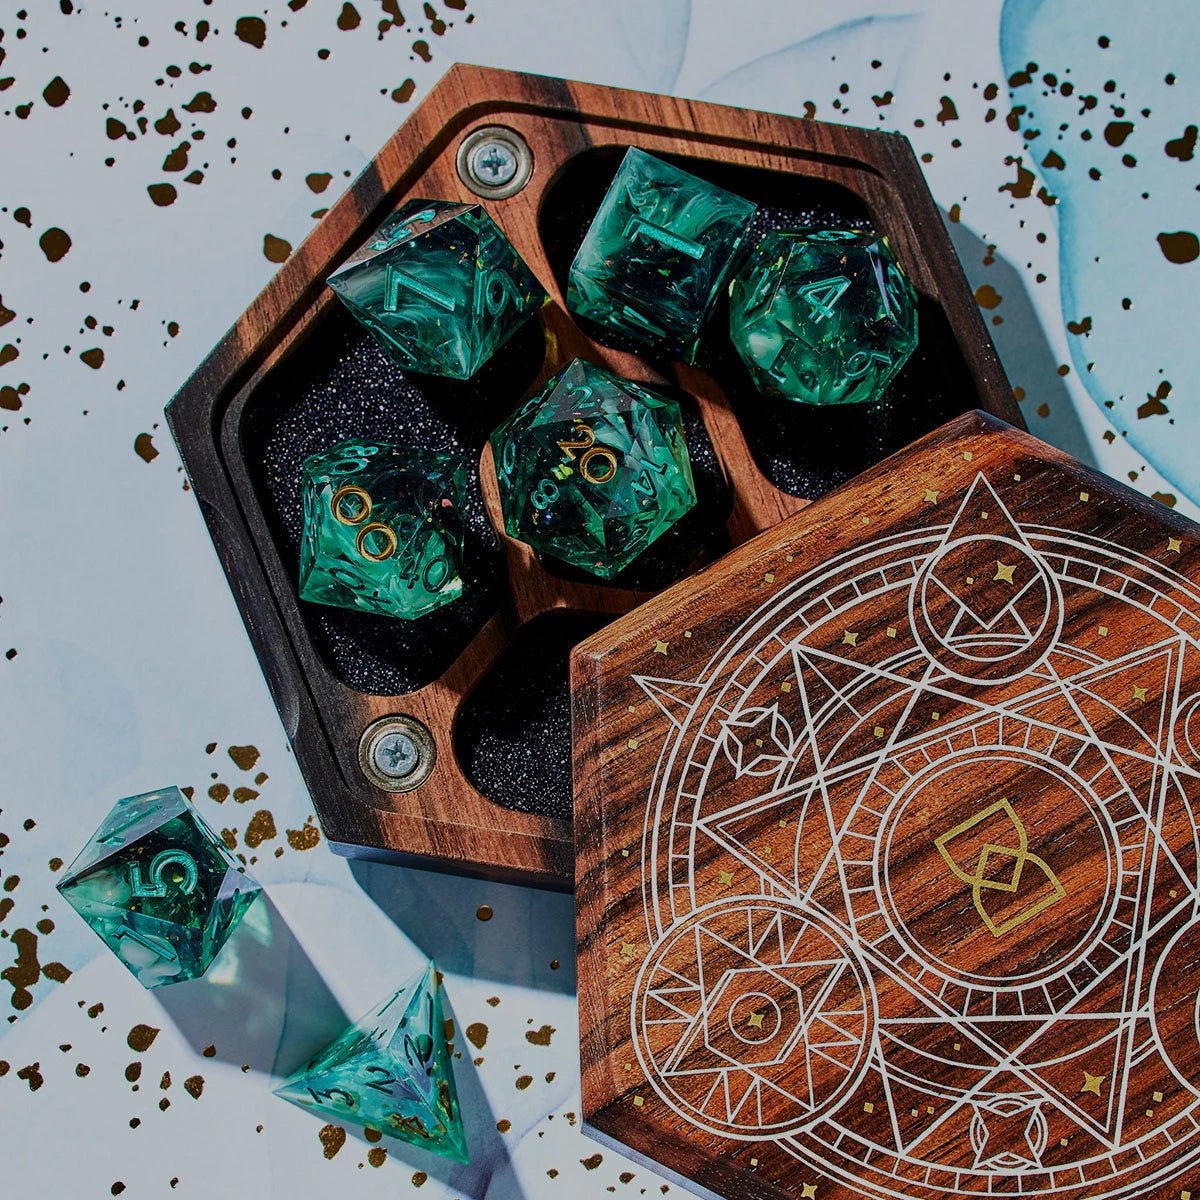 Dice Vault Table Top Role Playing and Gaming Accessories by Eldritch Arts  Wooden Box for Bones Board Games Tabletop Games 